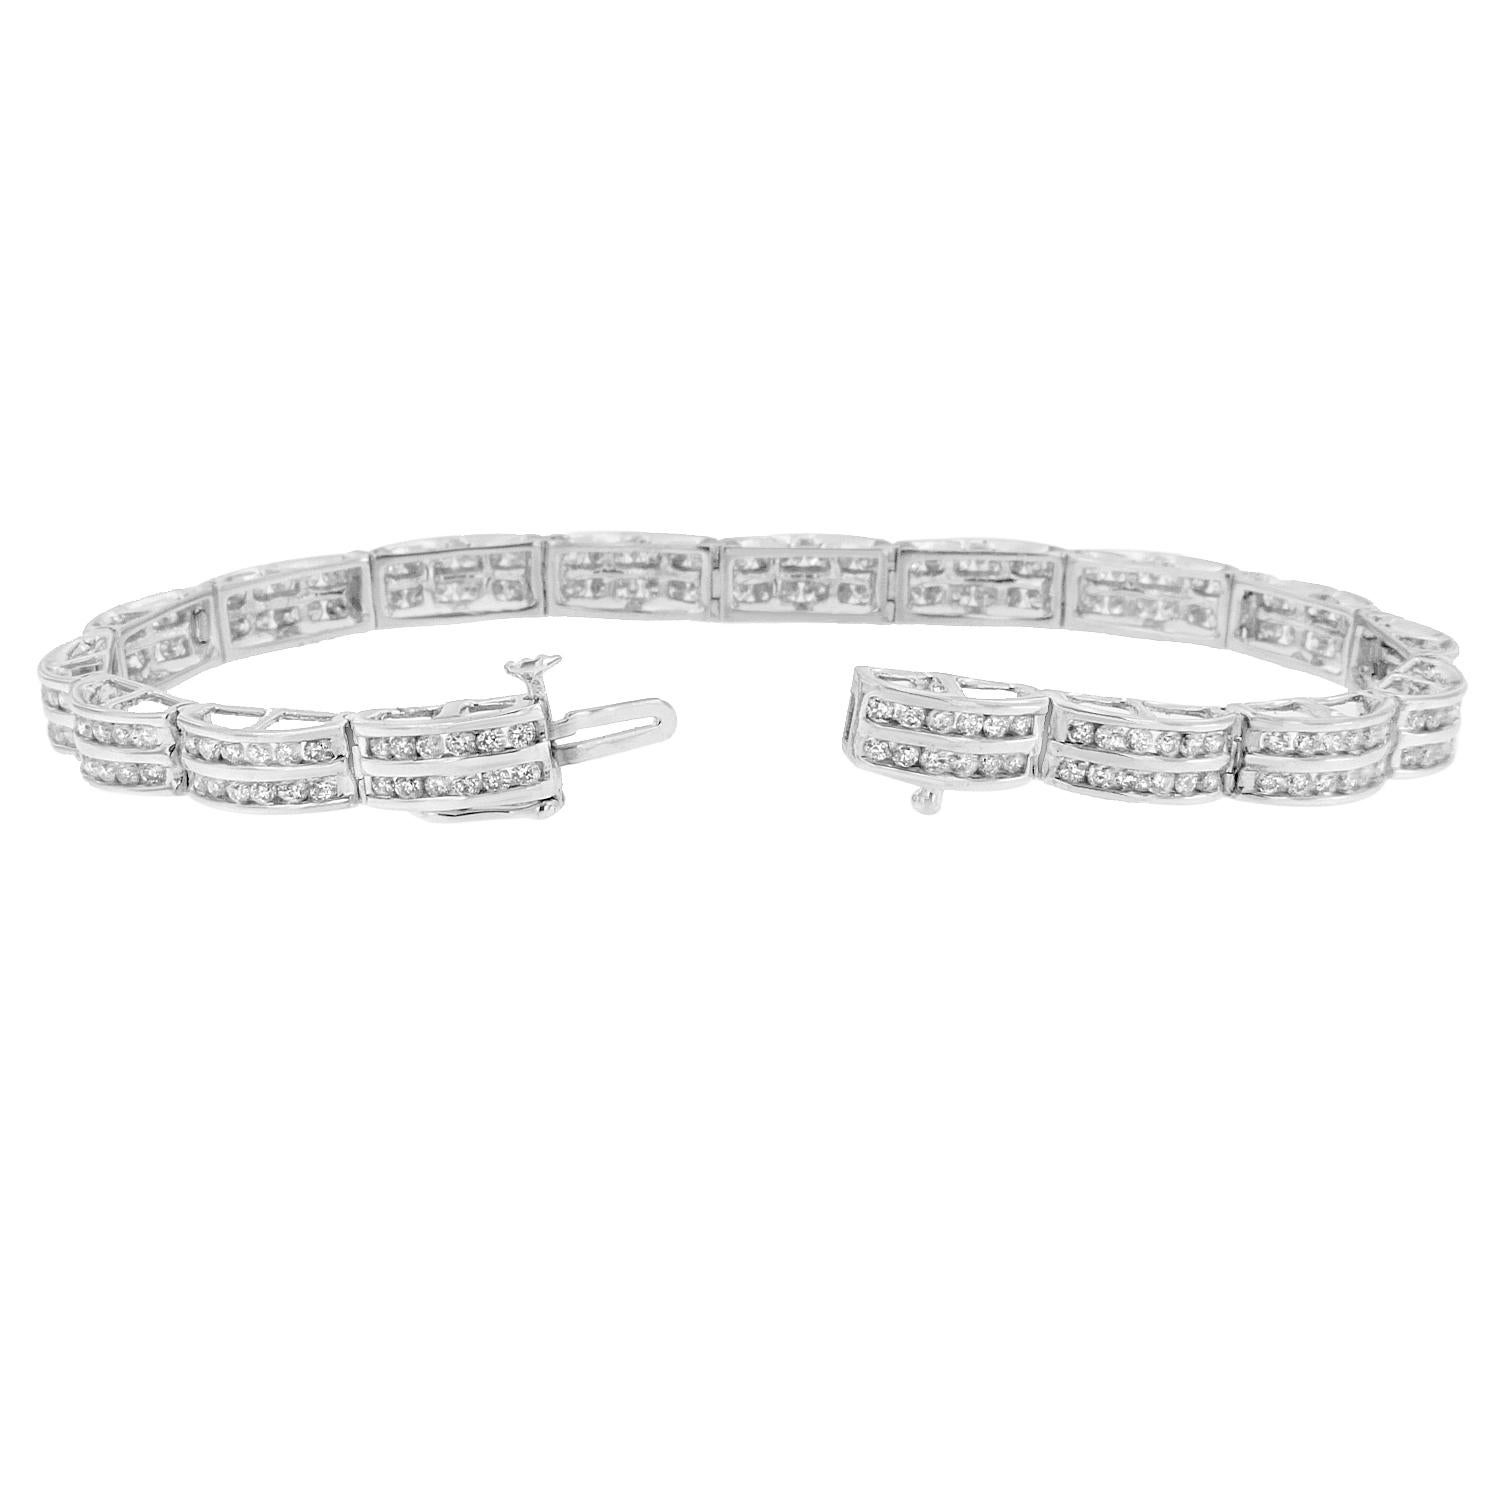 Glittering sweetly, this diamond tennis style bracelet is stylish for an everyday look. Created with 14 karats white gold, this stunning bracelet adds a subtle shimmer. Featuring chain like design, the unique setting with sparkling round cut